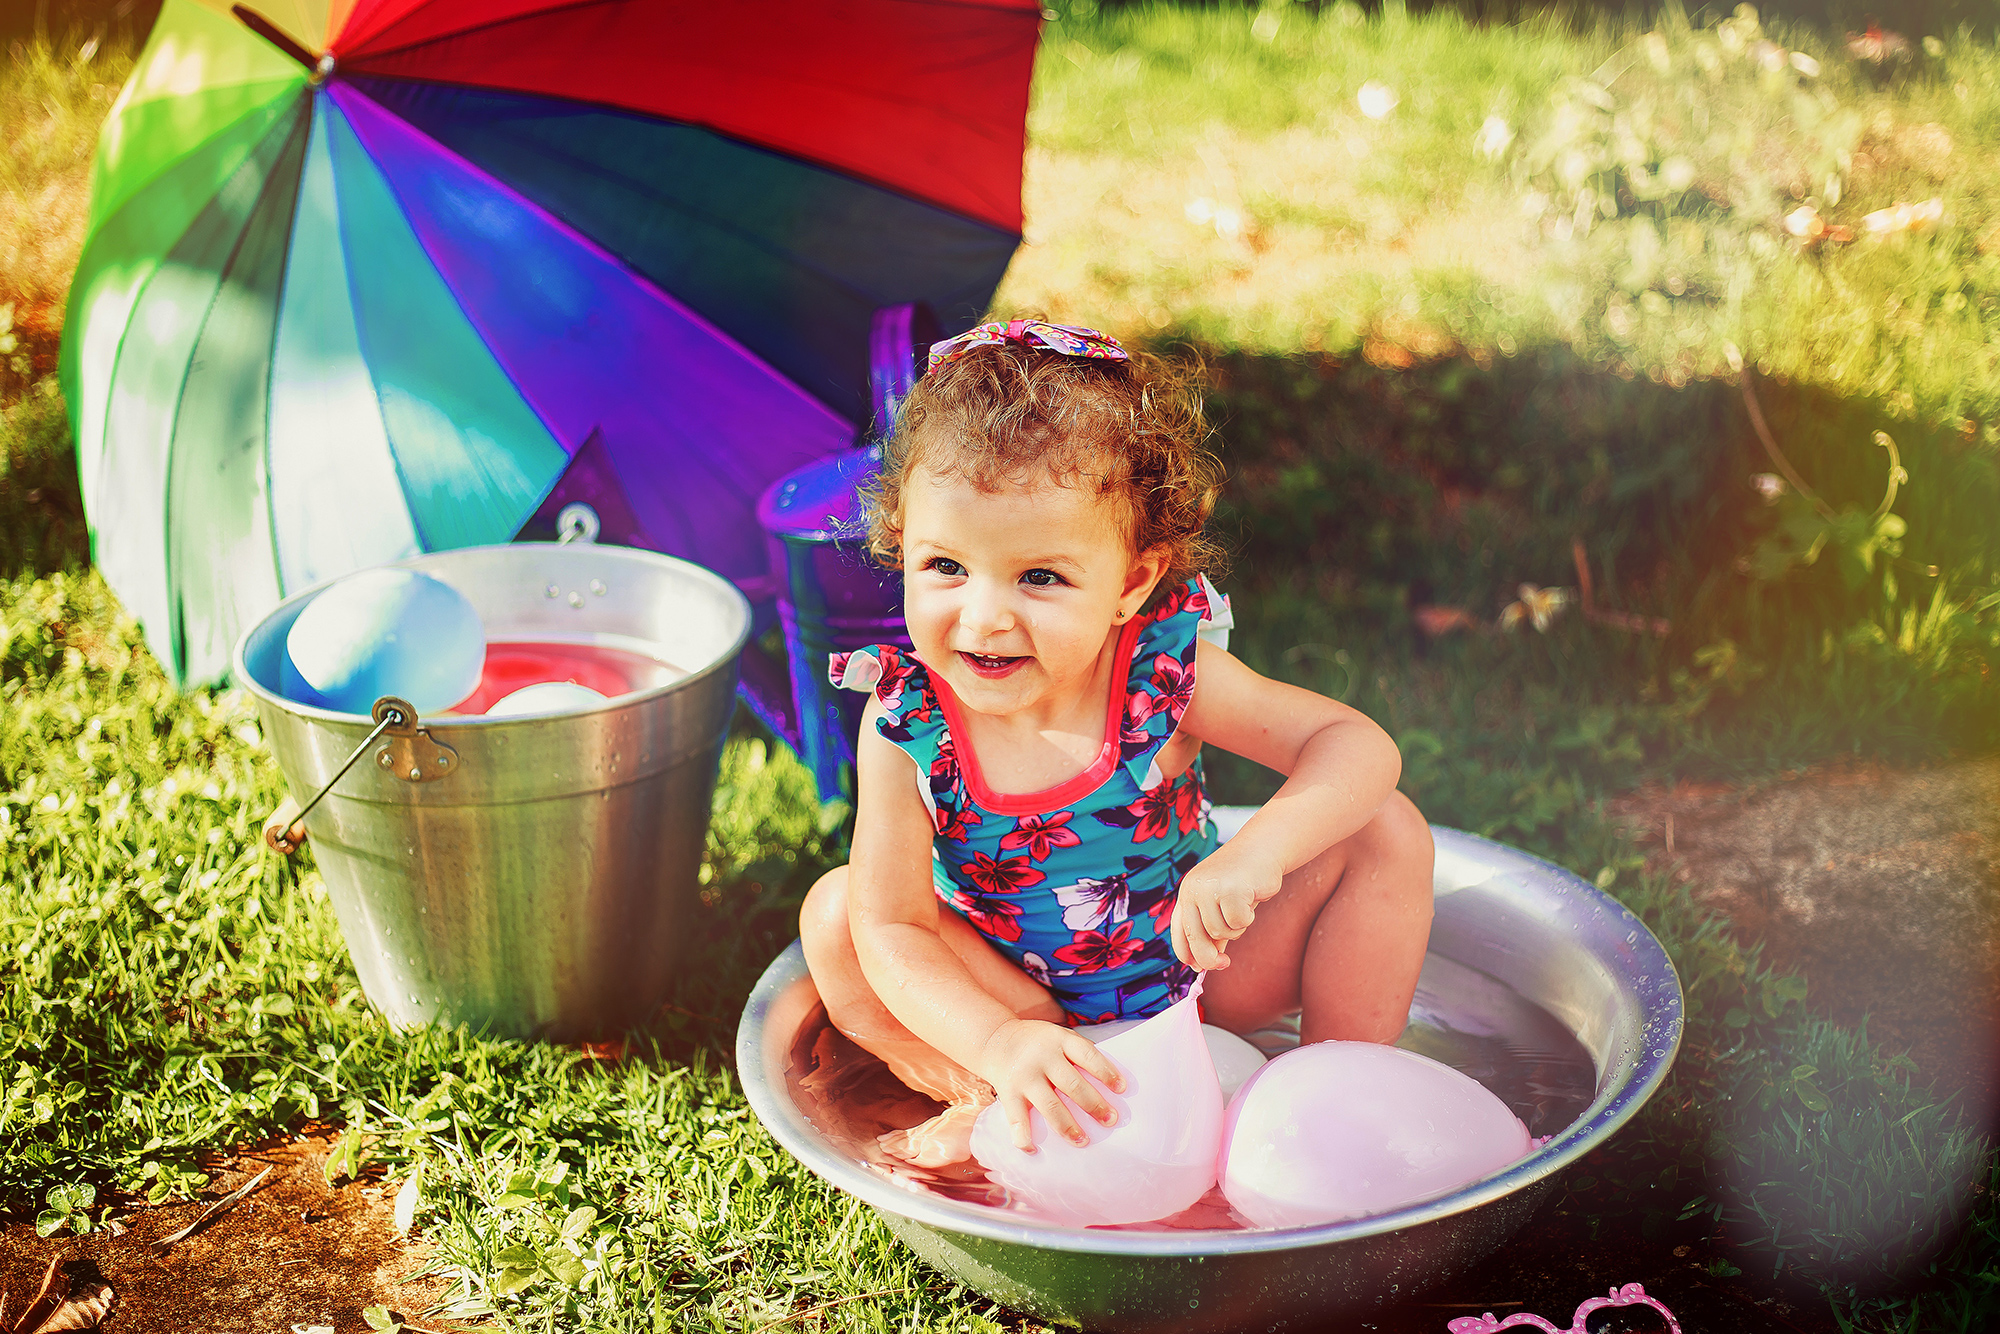 Little girl laughing playing in bucket with water ballons